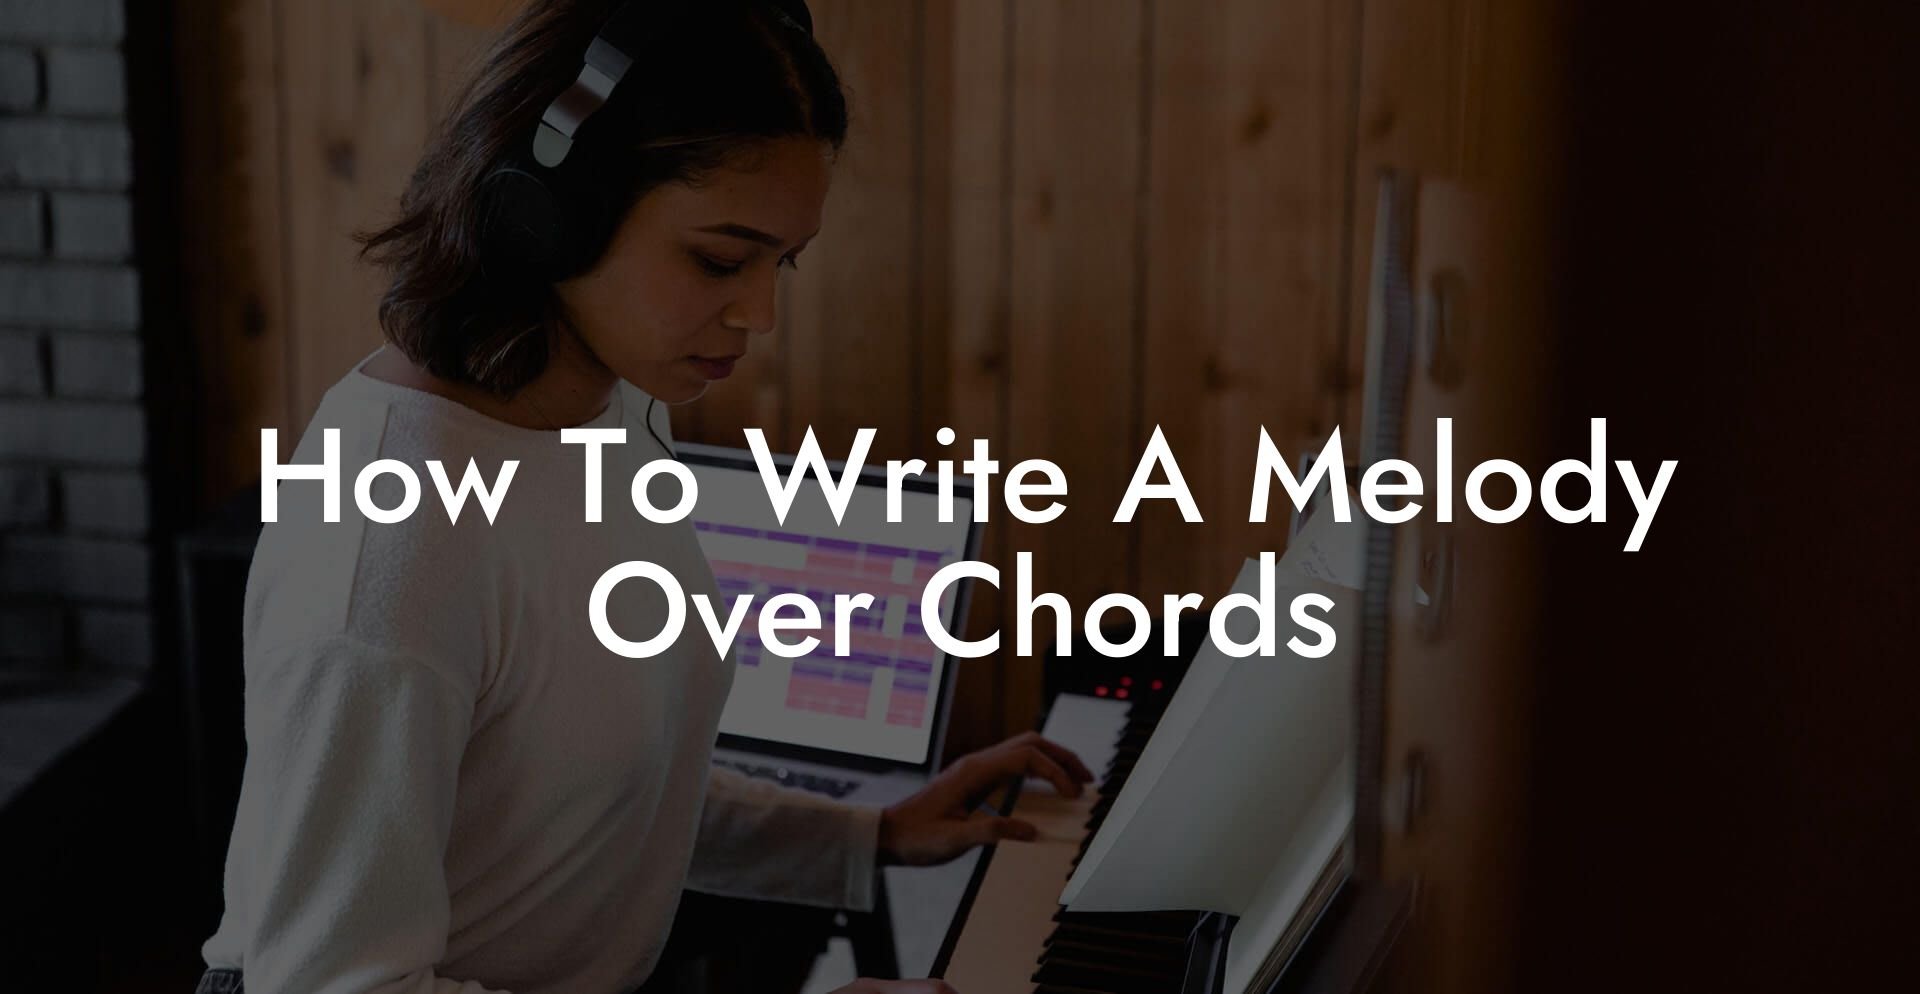 how to write a melody over chords lyric assistant